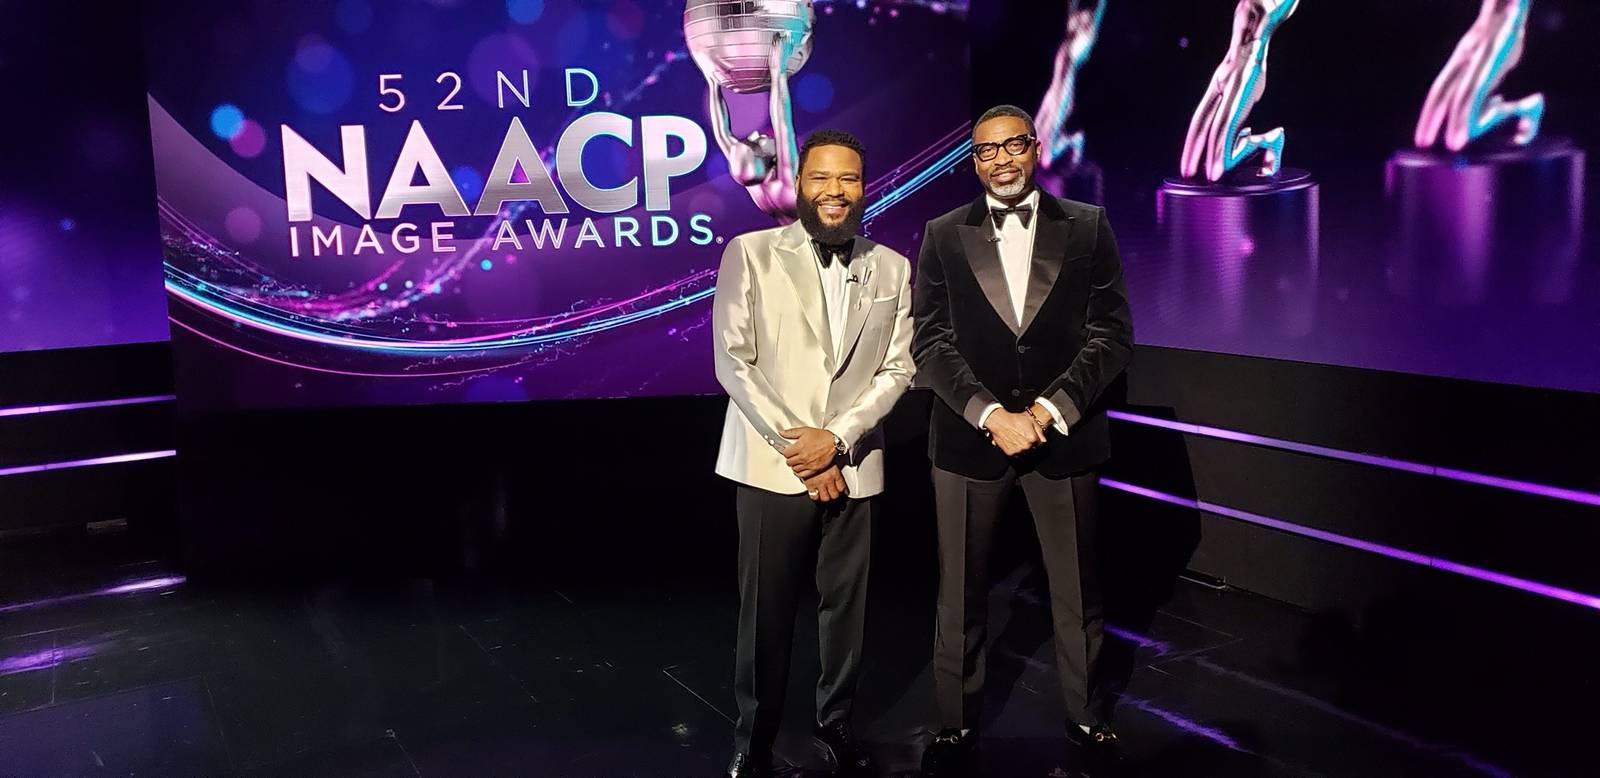 NAACP Image Awards 2021 See the complete list of winners 106.1 BLI